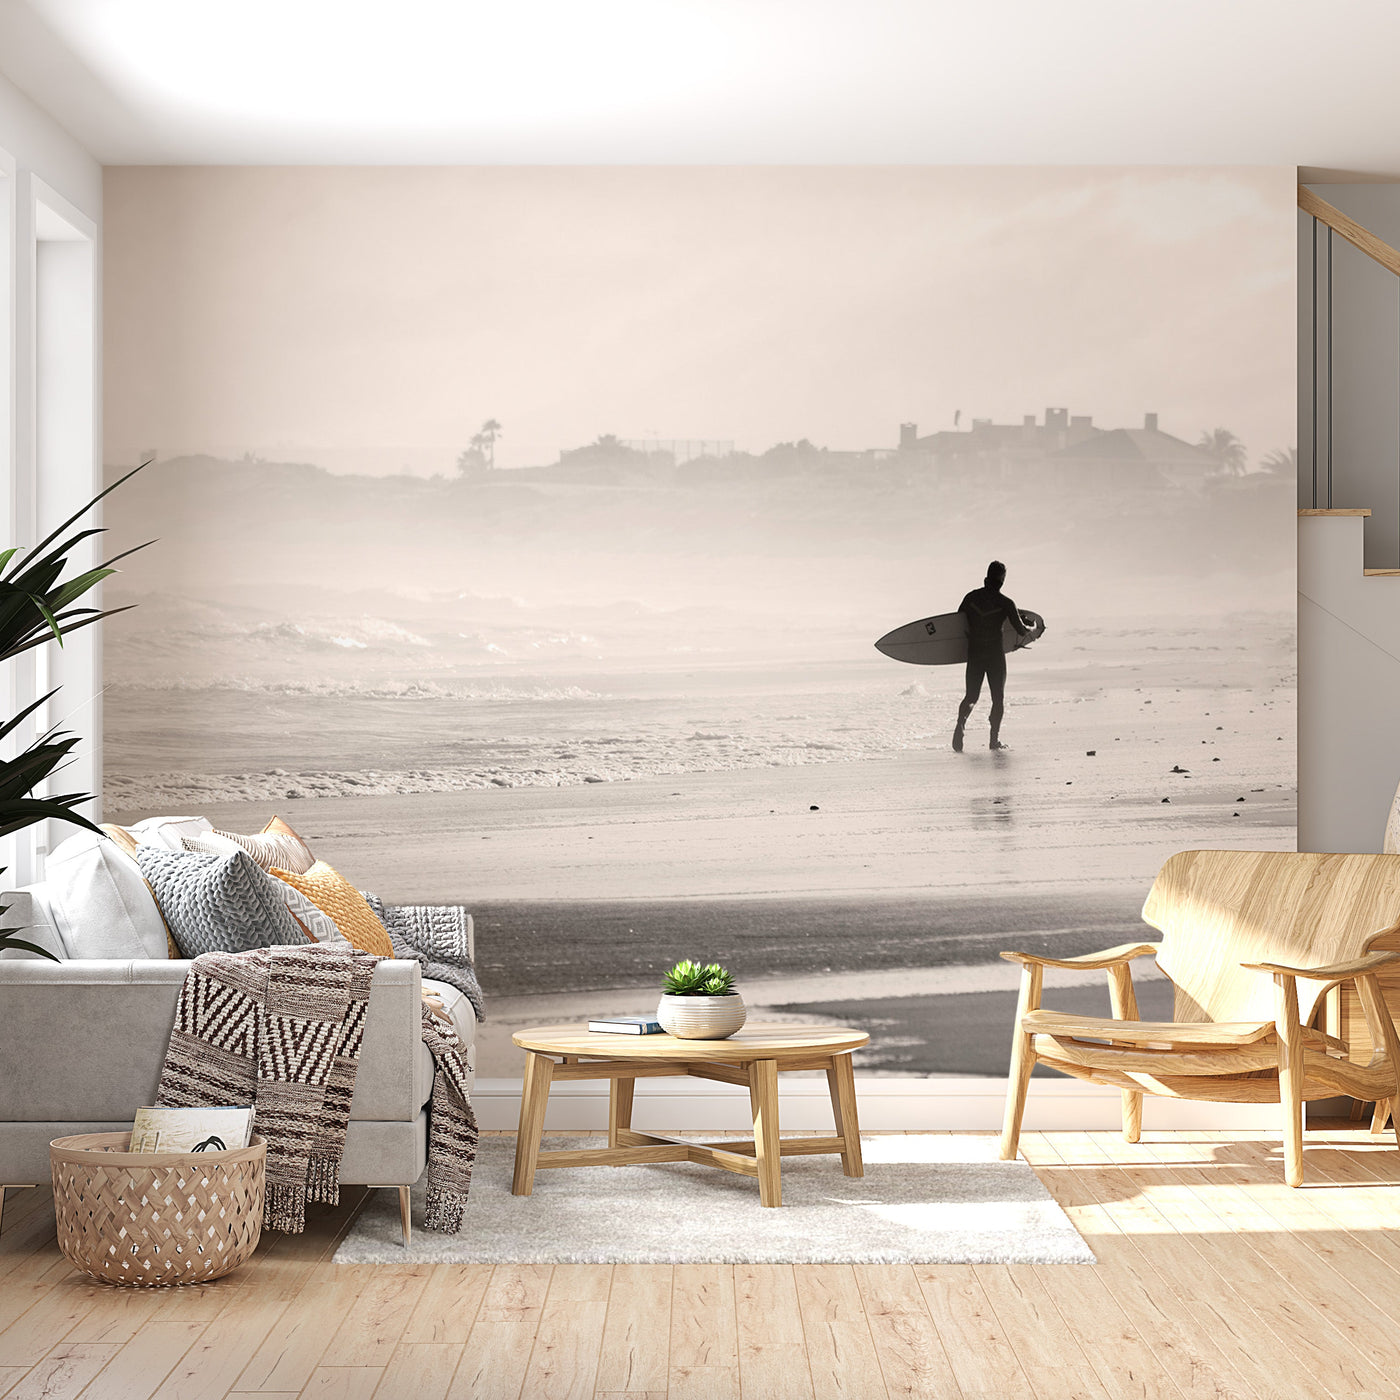 Peel & Stick Beach Wall Mural - Surfer by the Ocean - Removable Wall Decals-Tiptophomedecor